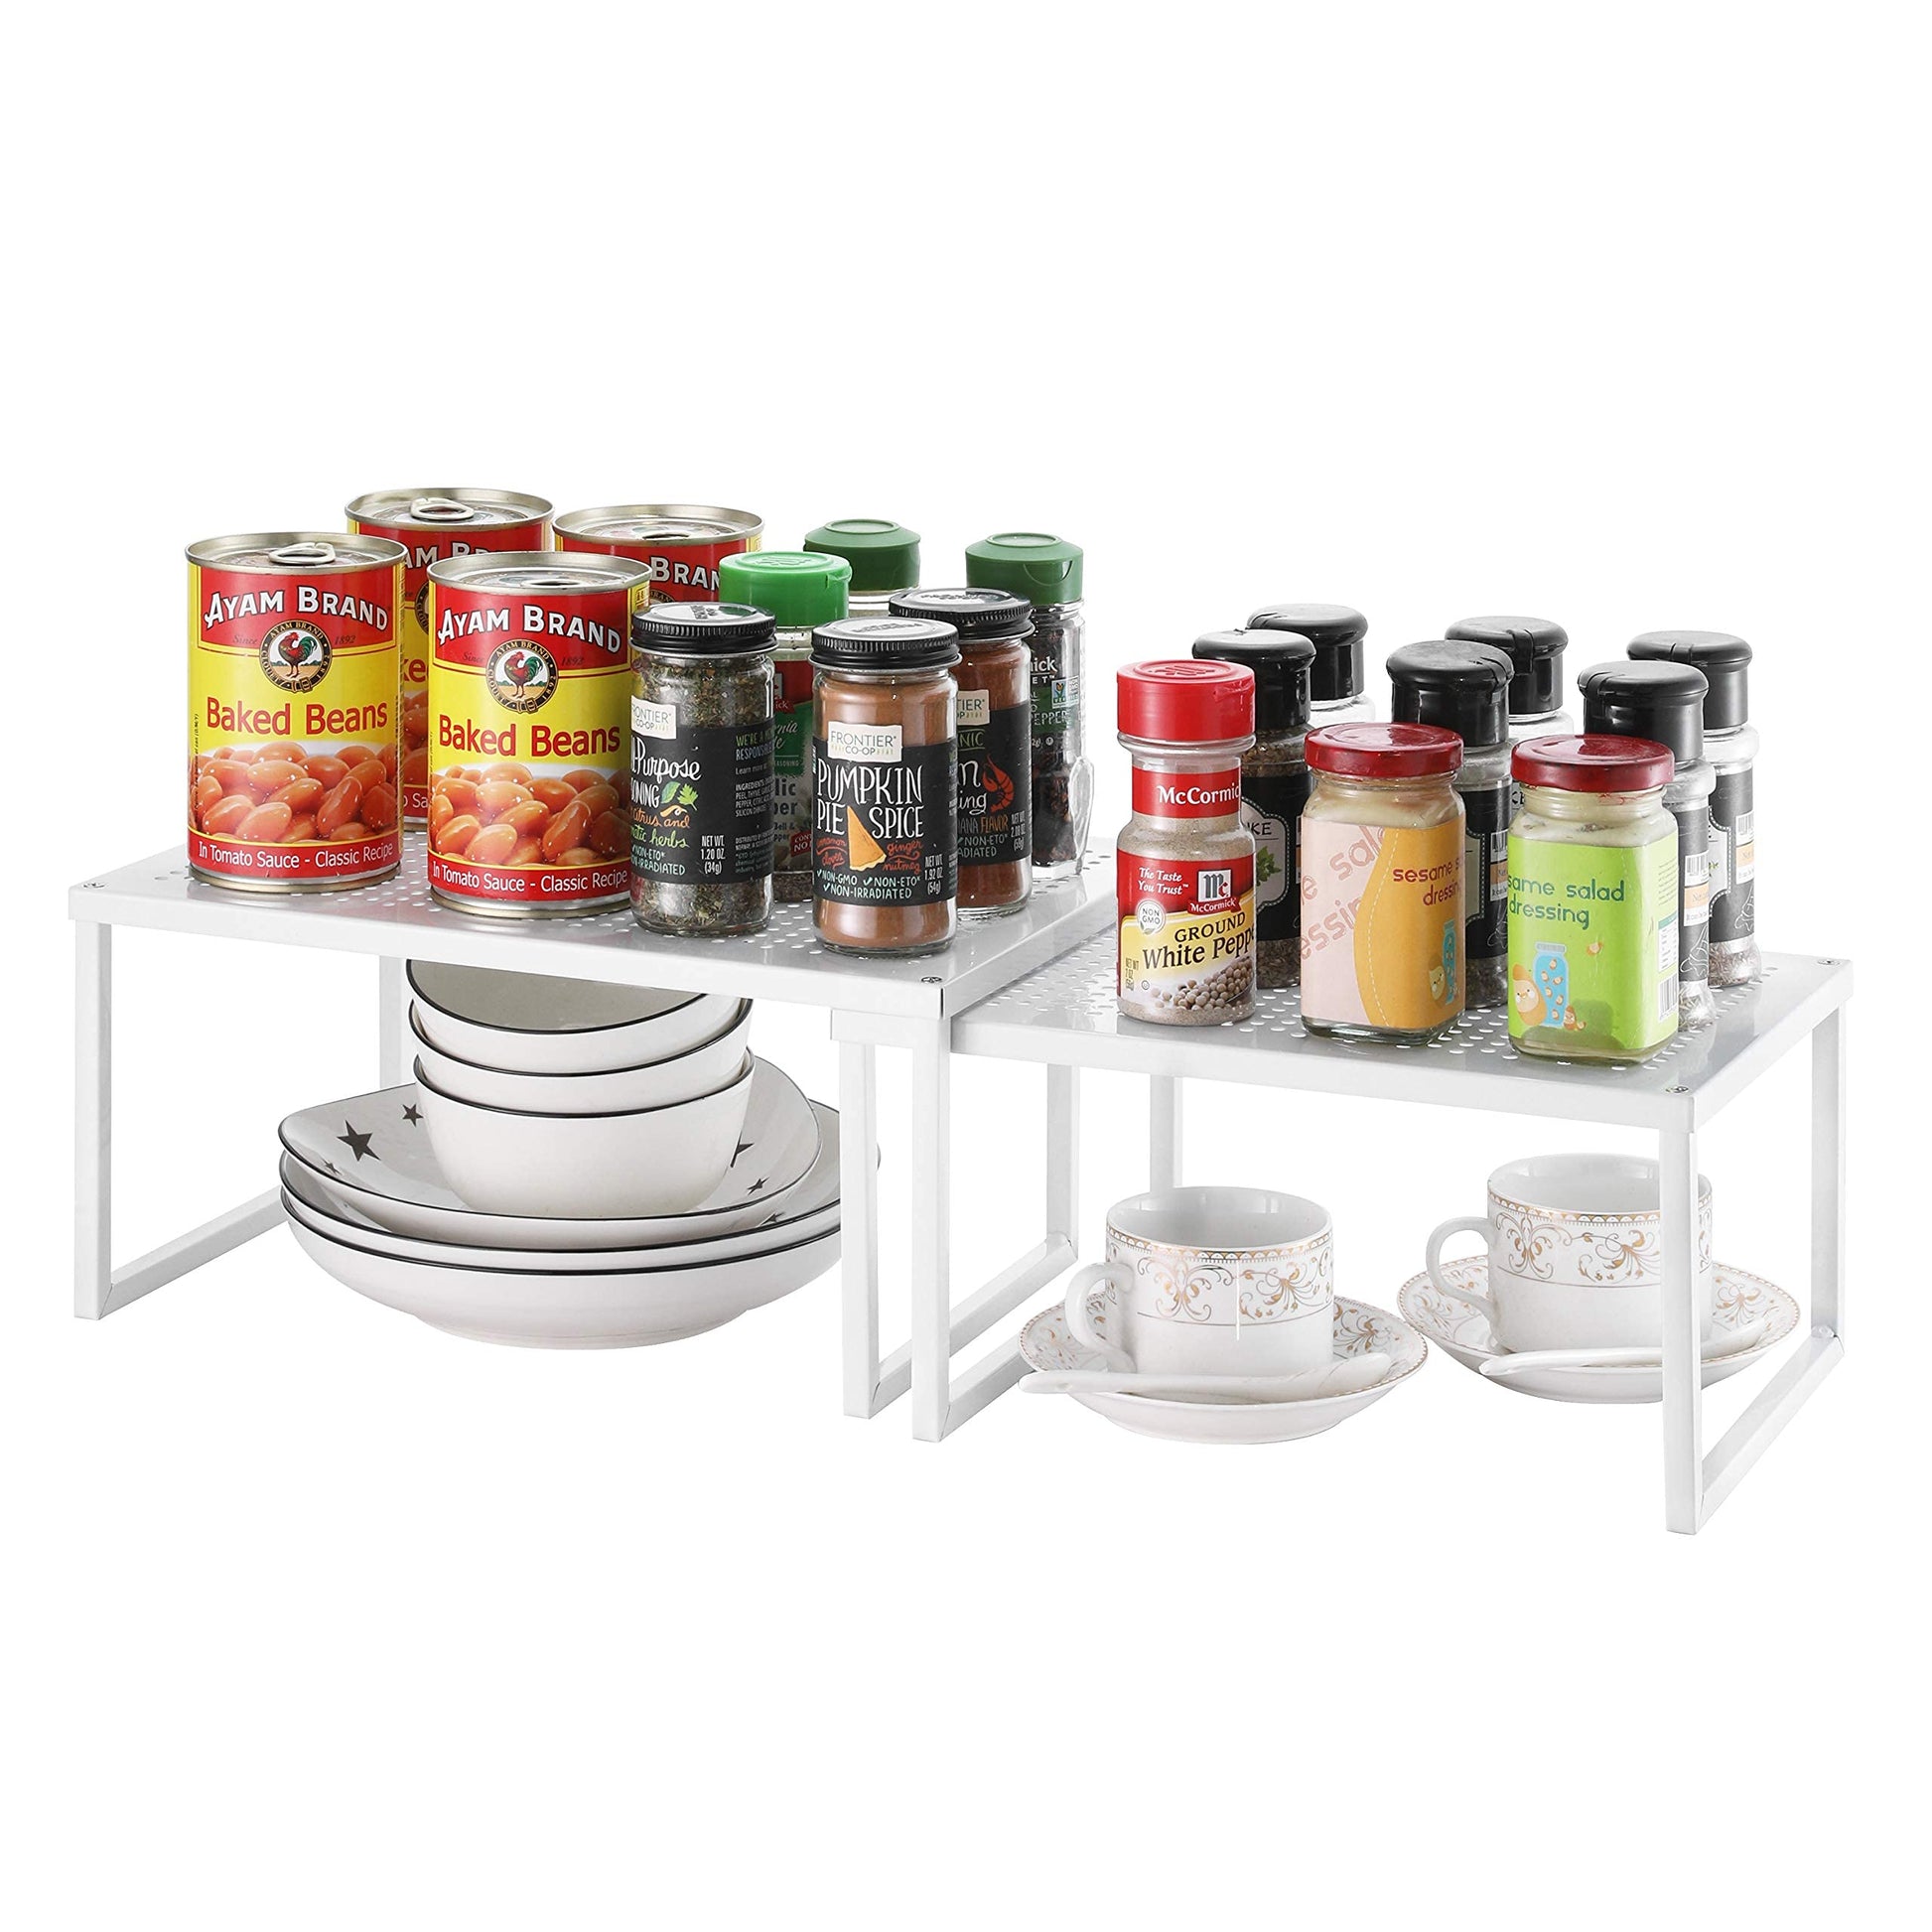 Masirs Clear Stackable Shelf, Easily Organize Your Kitchen Counter and Cabinet Shelves While Creating Extra Storage Space with This Foldable